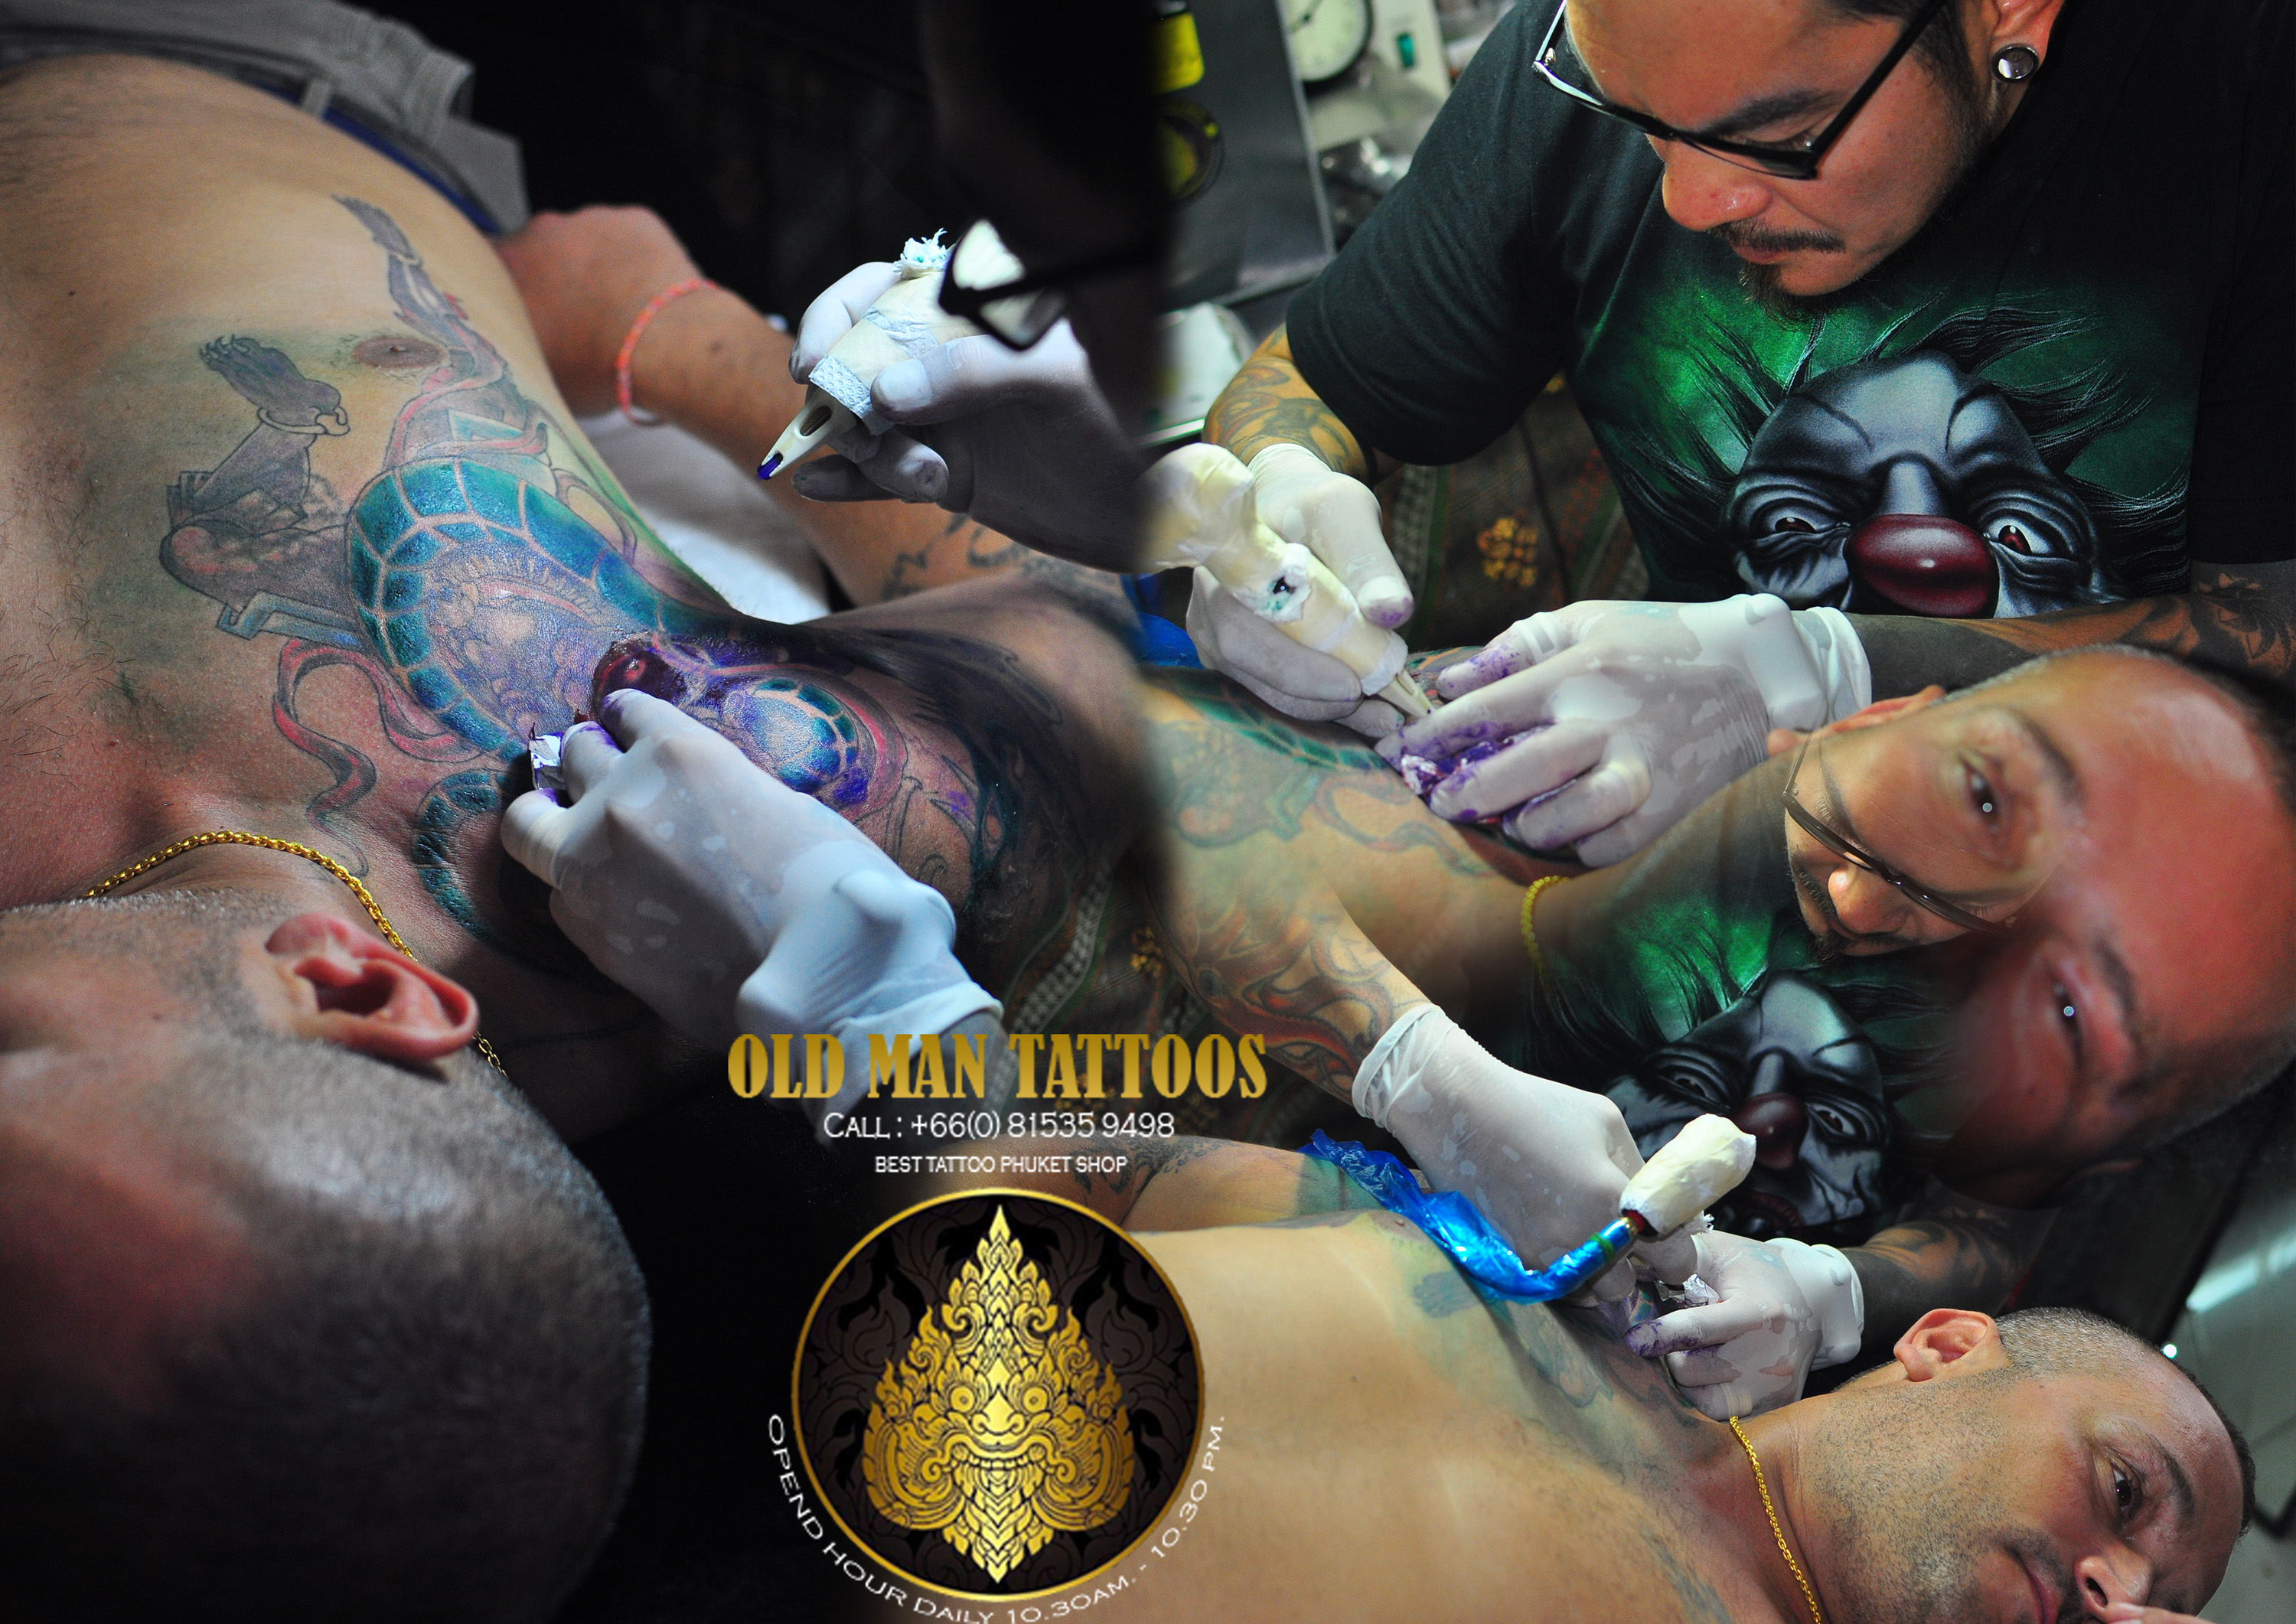 the best tattoo shop Archives - Old Man Tattoos Phuket Thailand Old Man Tattoos  Phuket Thailand